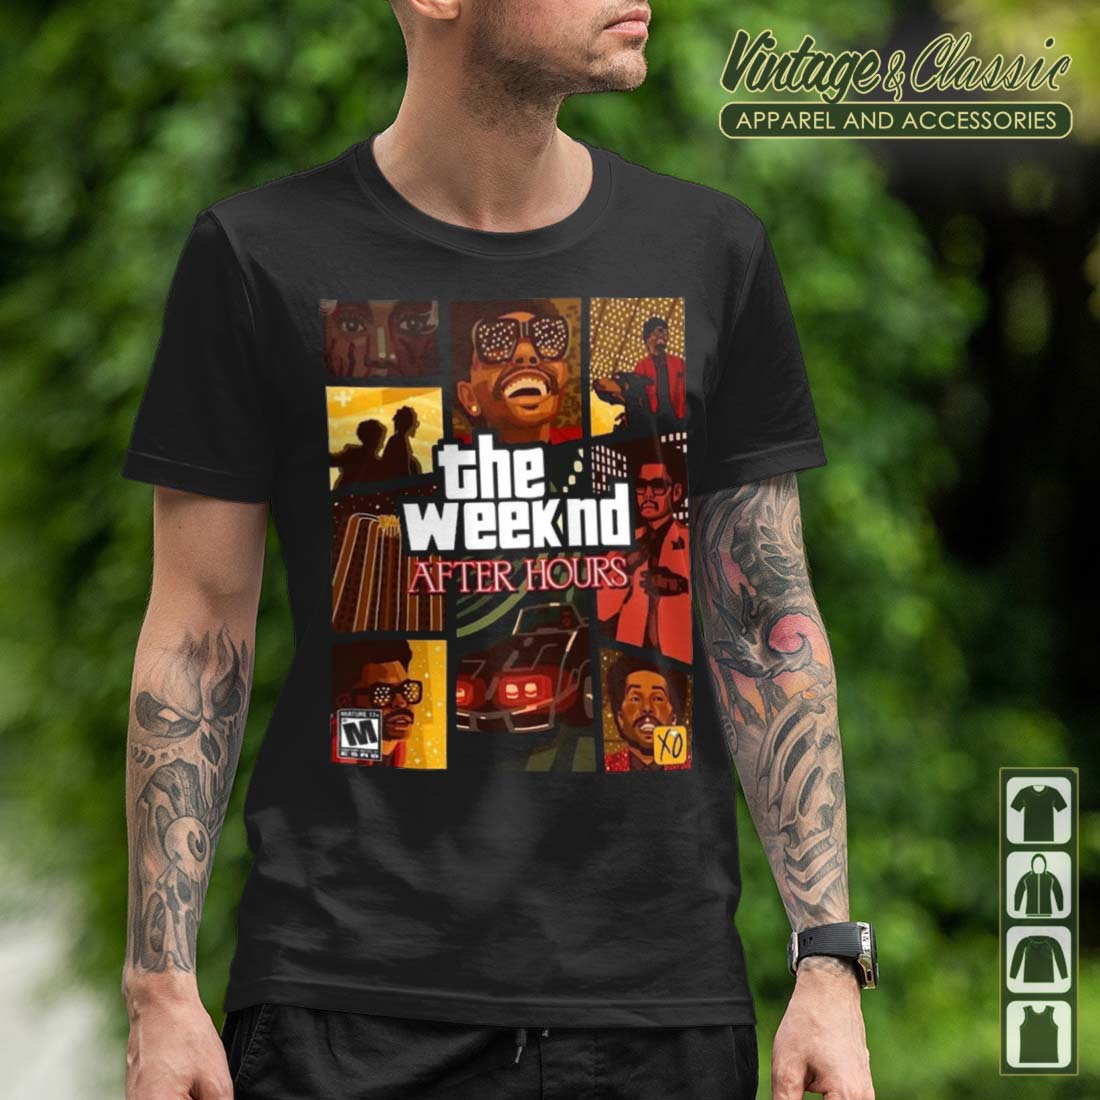 The Weeknd T-Shirt, After Hours, Gift For The Weeknd Fans